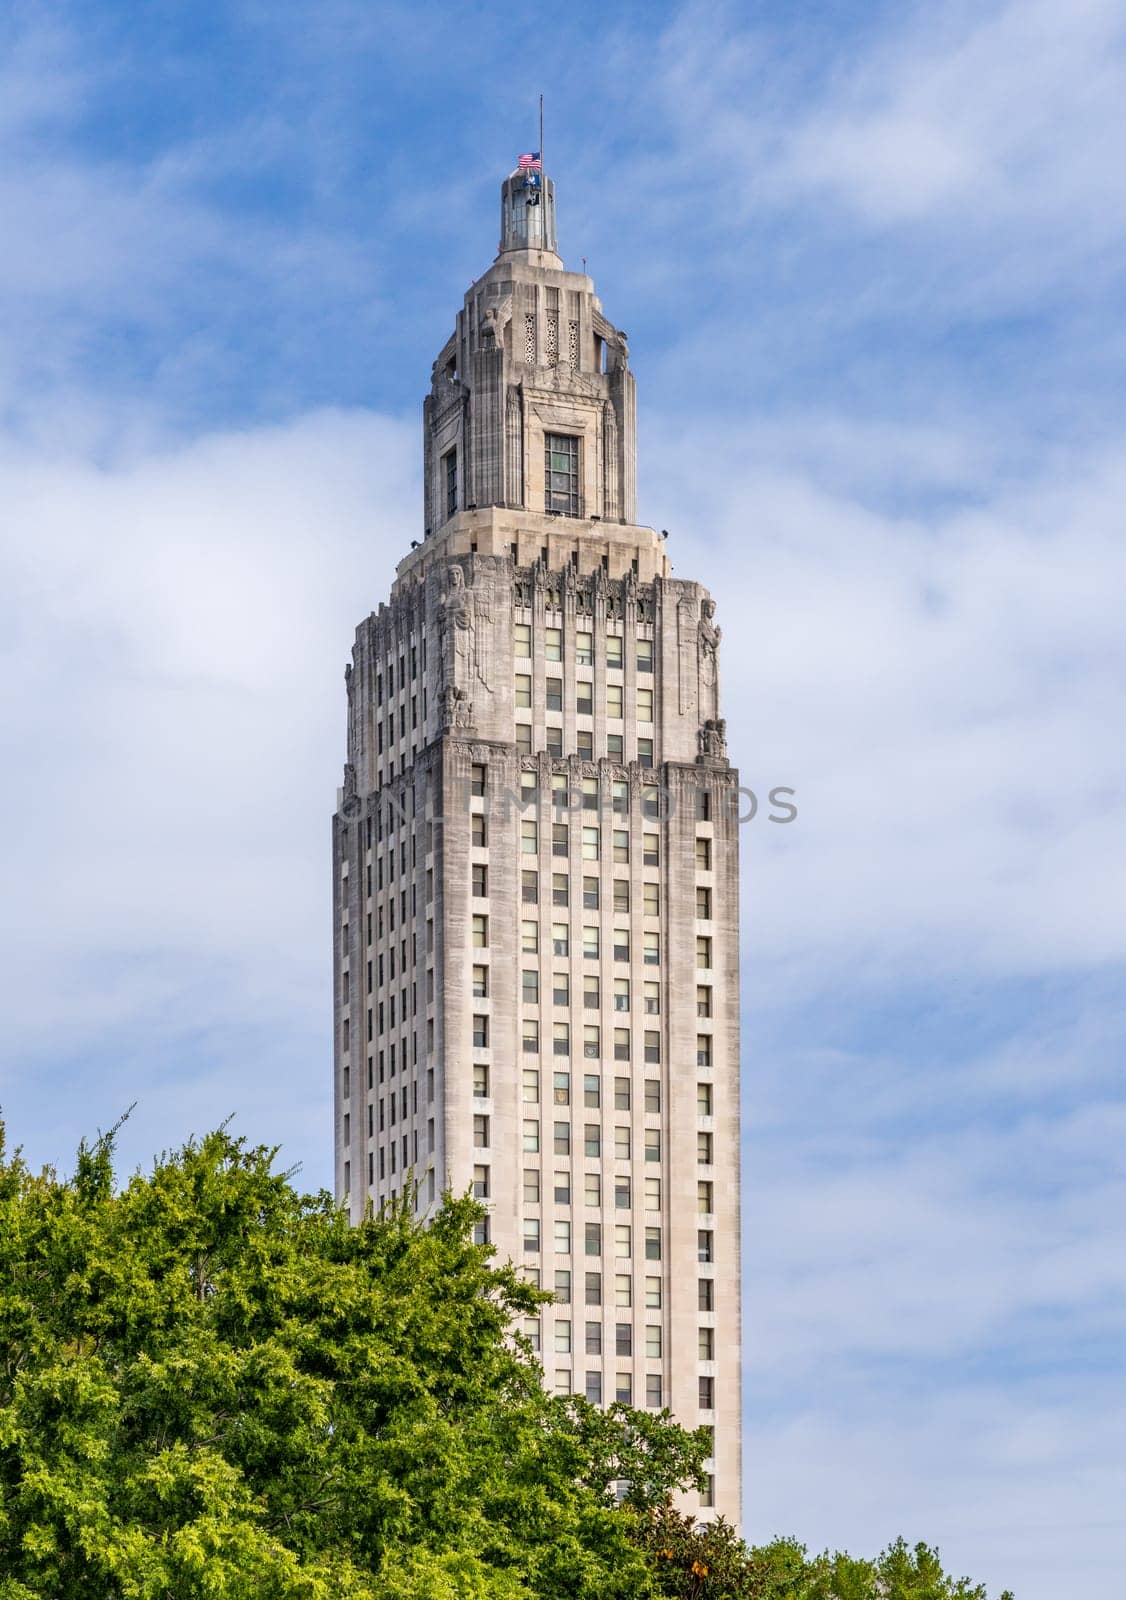 Tall tower of the State Capitol building in Baton Rouge, the state capital of Louisiana